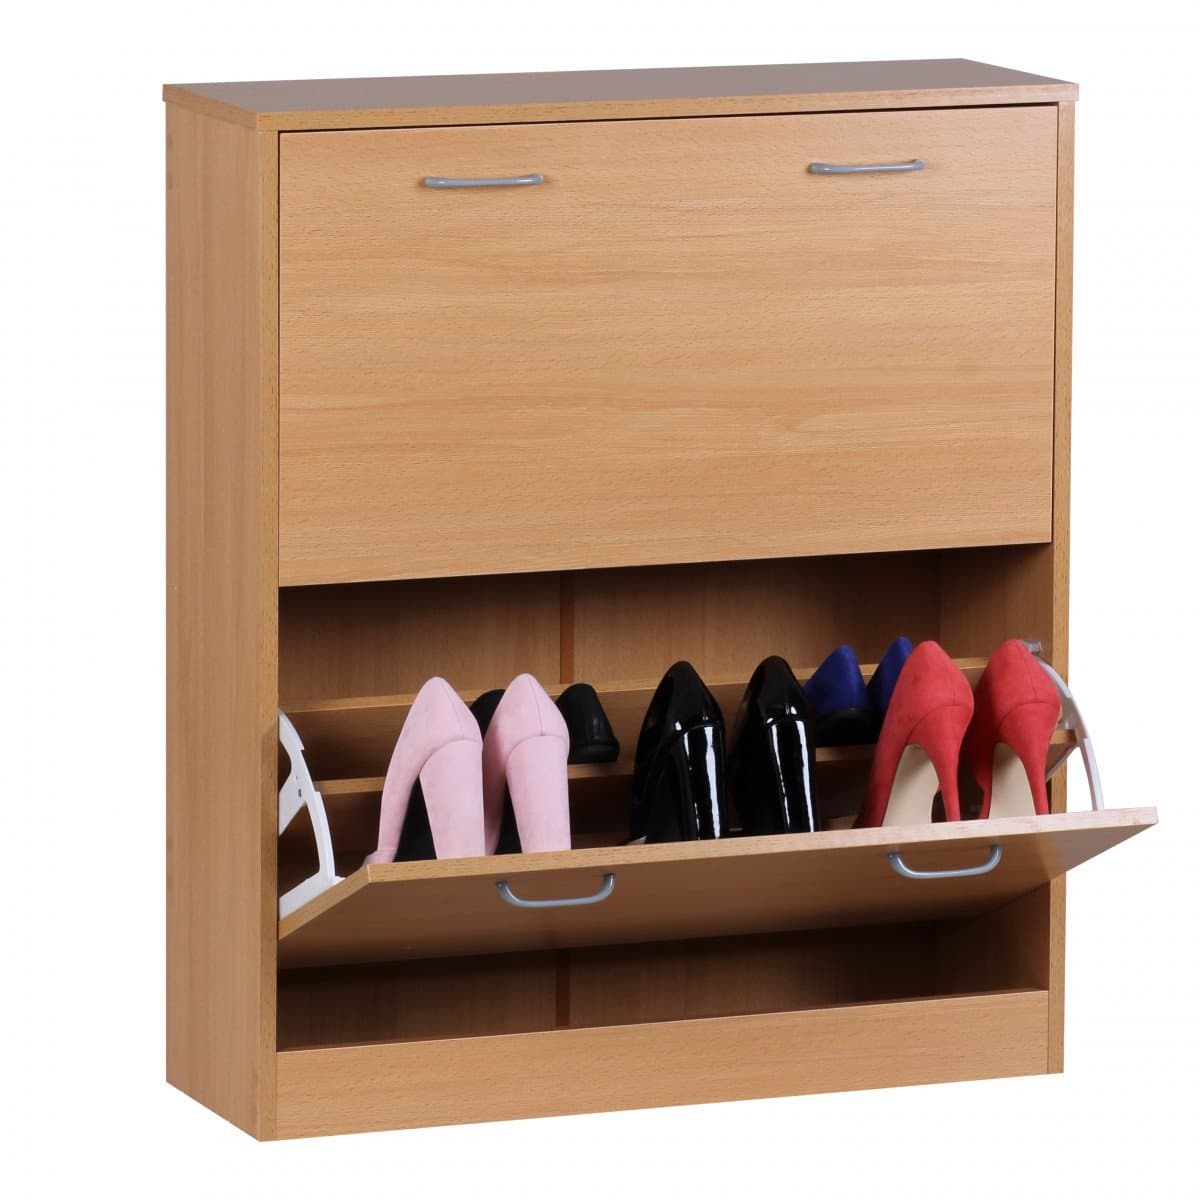 Nancy's Shoe Cabinet - Shoe Rack - For 20 Pairs of Shoes - Shoe Cabinets